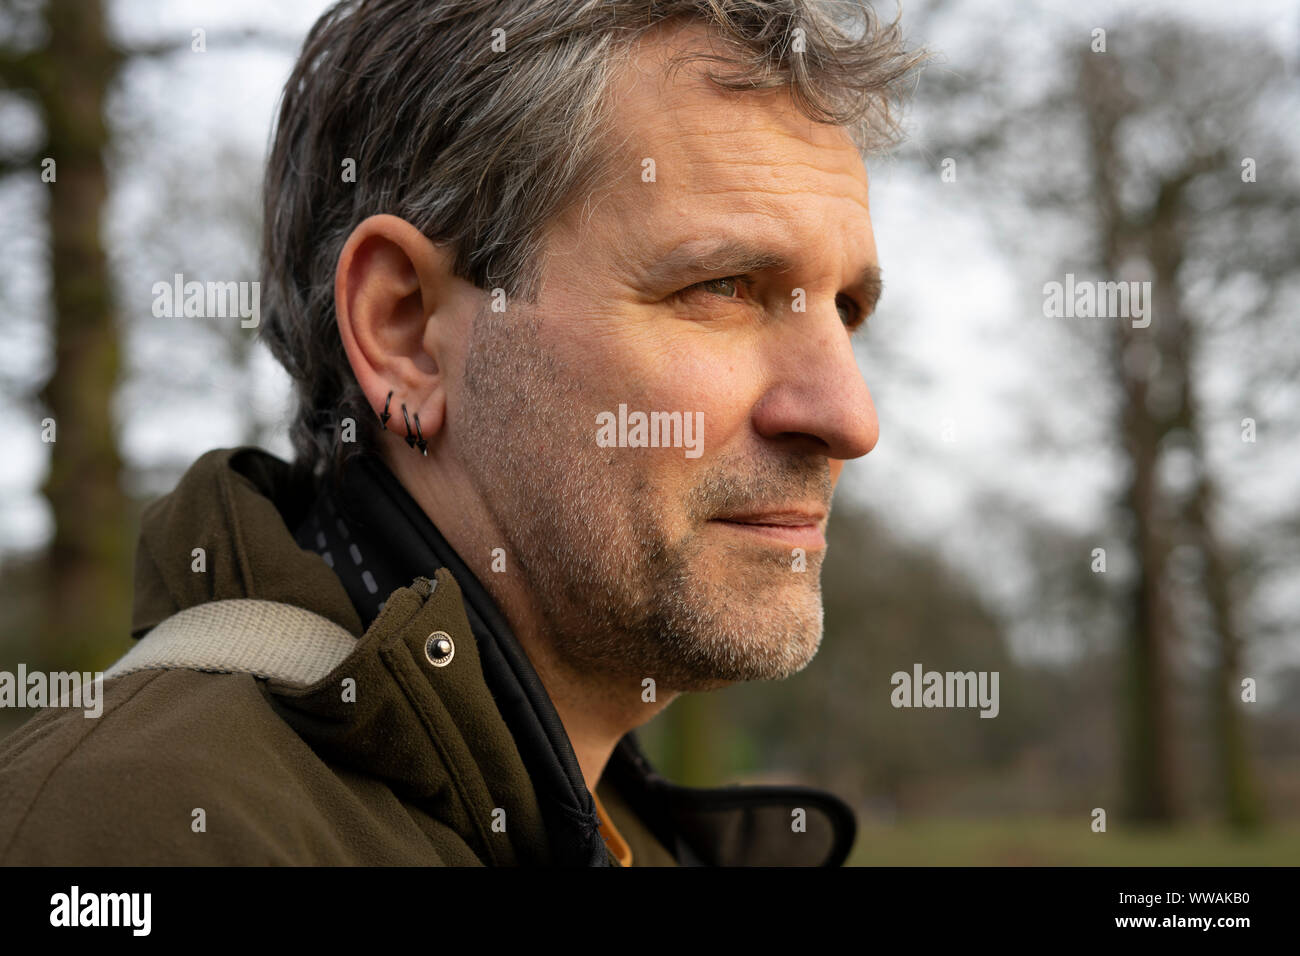 Close-up portrait of a man in his 50's, grey hair wearing a coat and carrying a camera Stock Photo